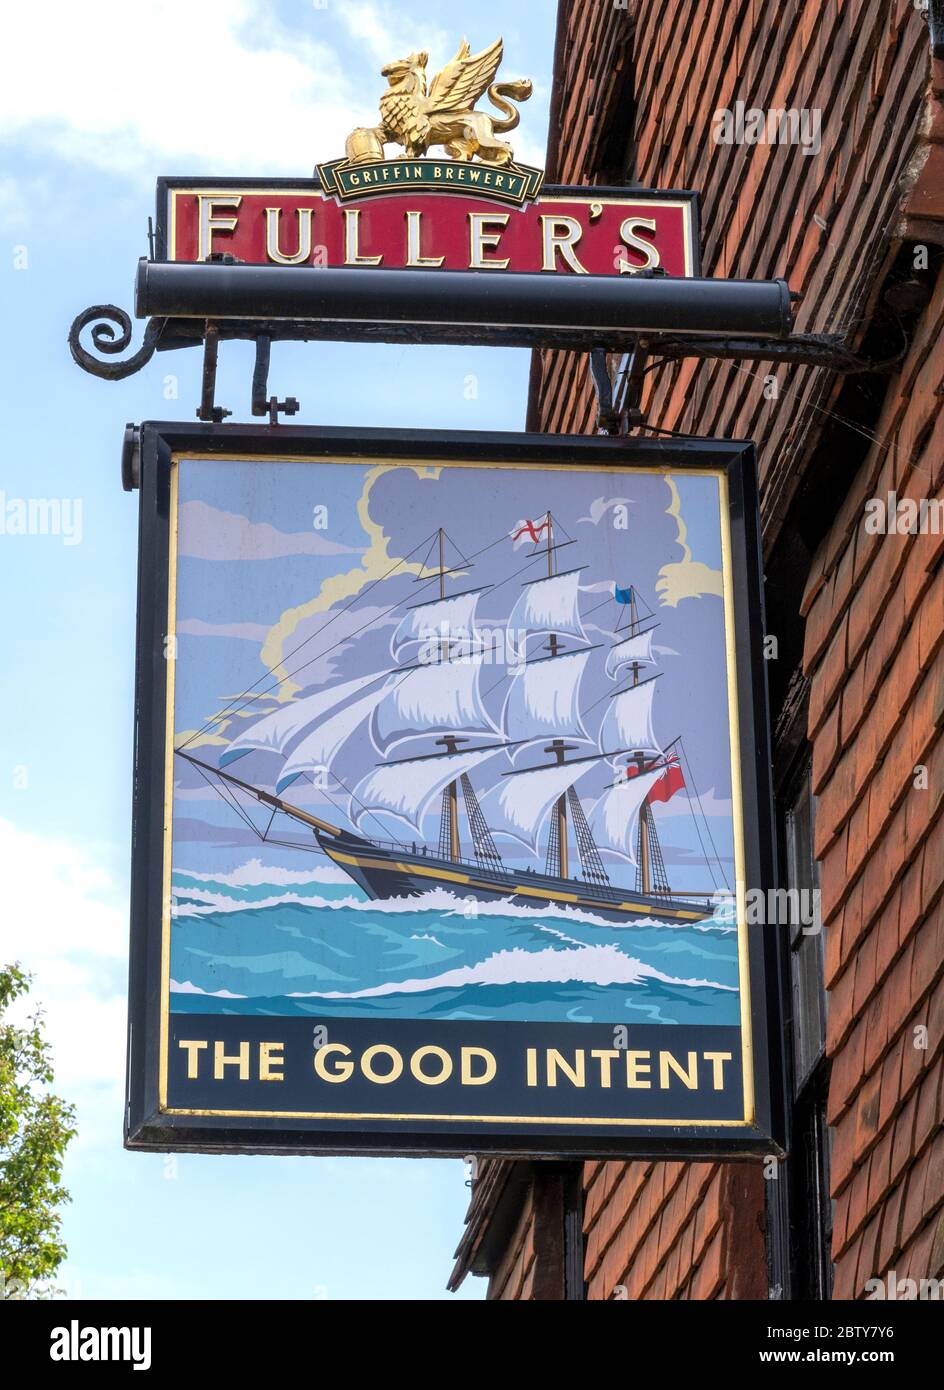 Traditional hanging pub sign at The Good Intent public house - a Fullers pub - 40-46 College Street, Petersfield, Hampshire, England, UK Stock Photo